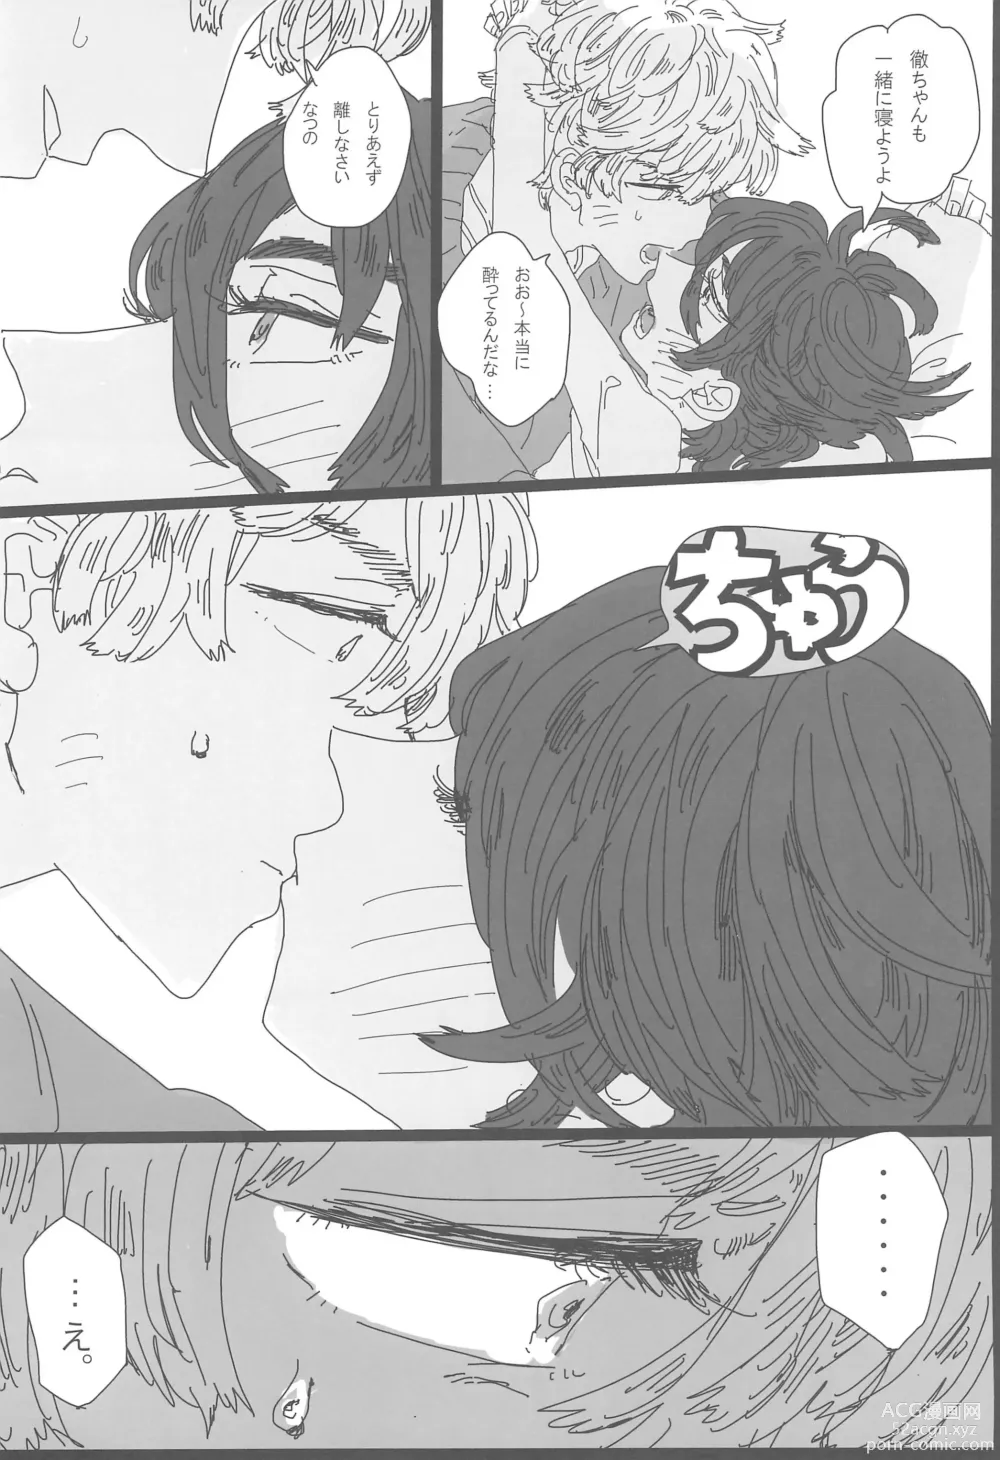 Page 18 of doujinshi ANDTHERE WAS EVENING AND THERE WAS MORNING The forth day